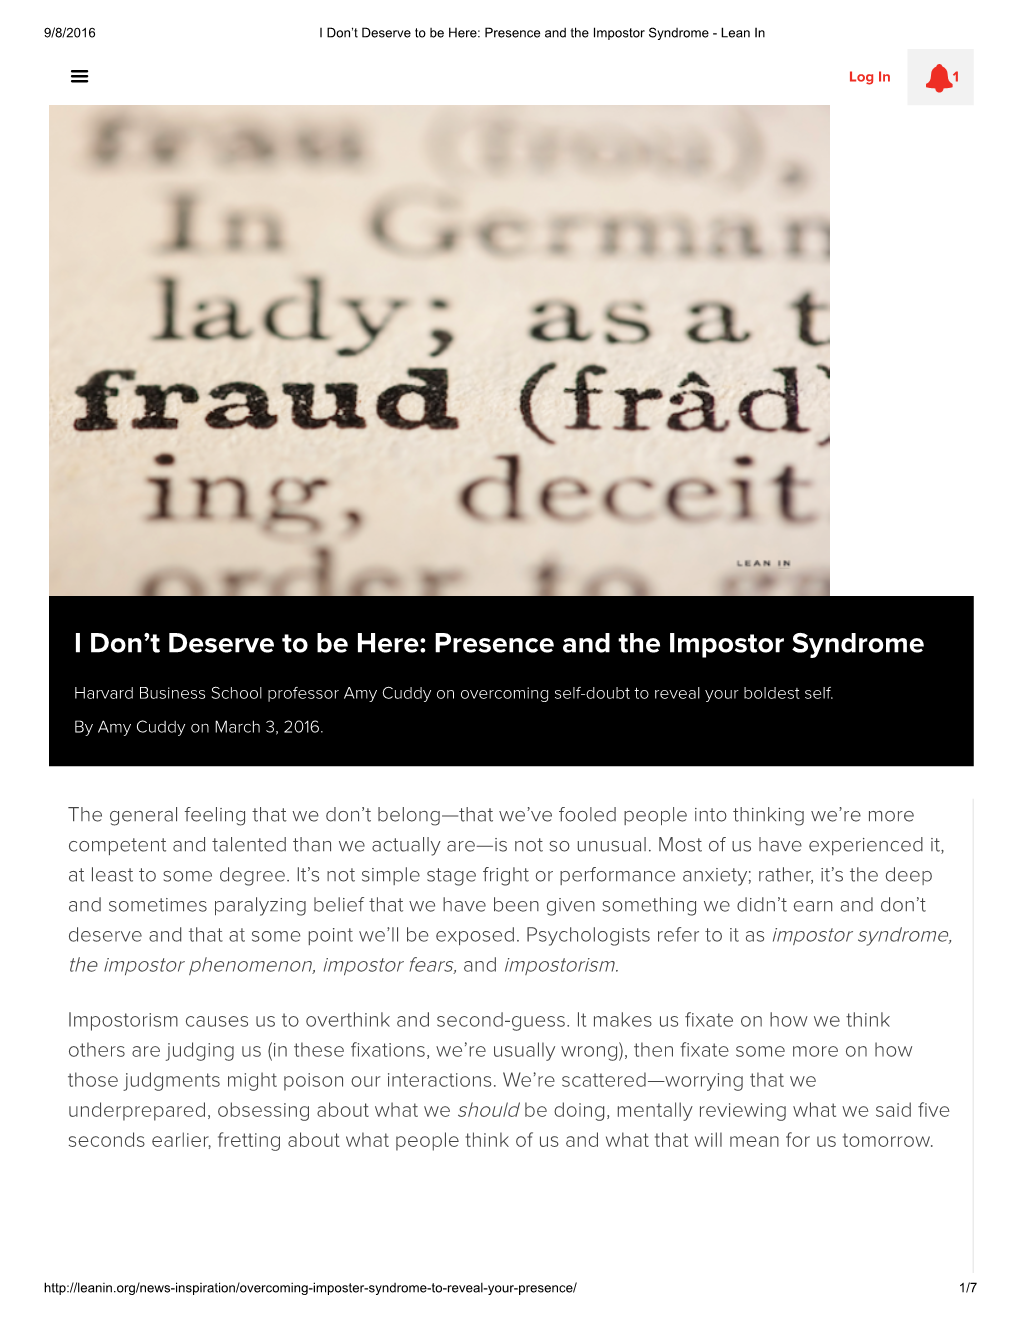 I Don't Deserve to Be Here: Presence and the Impostor Syndrome 1